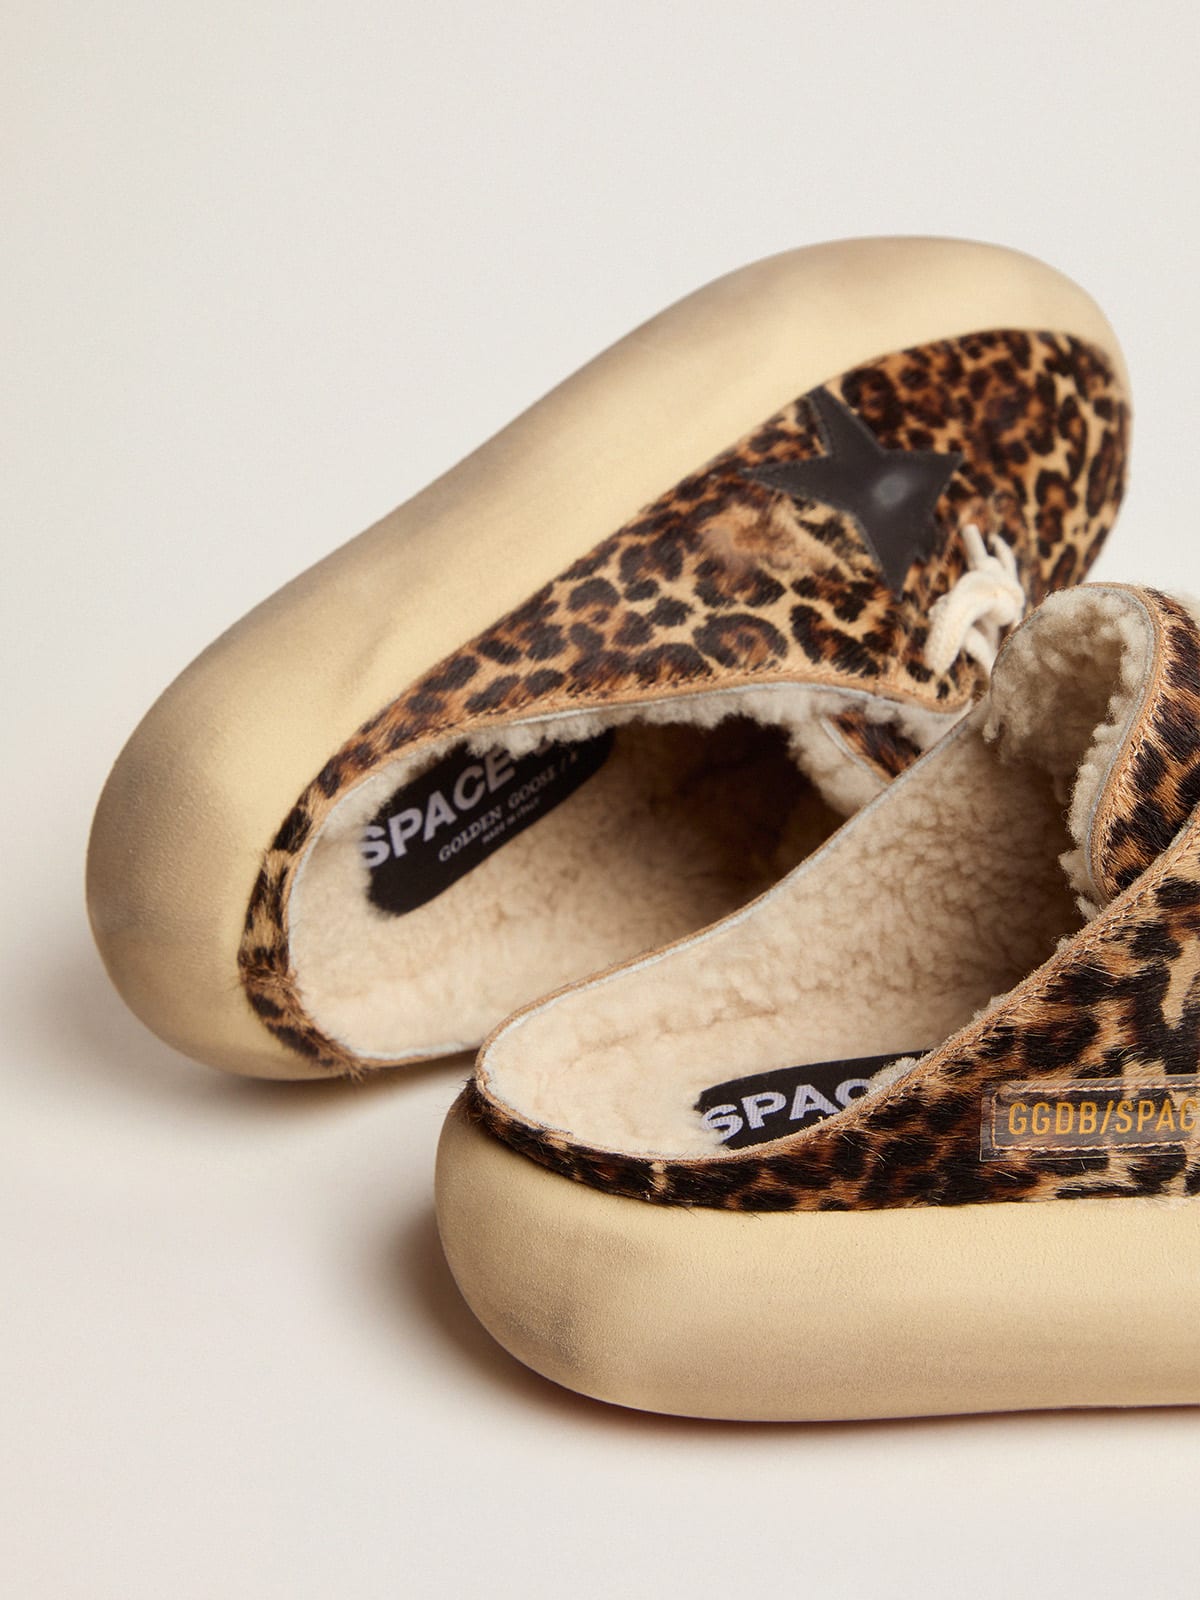 Golden Goose - Women's Space-Star Sabot in animal print pony skin and shearling lining in 